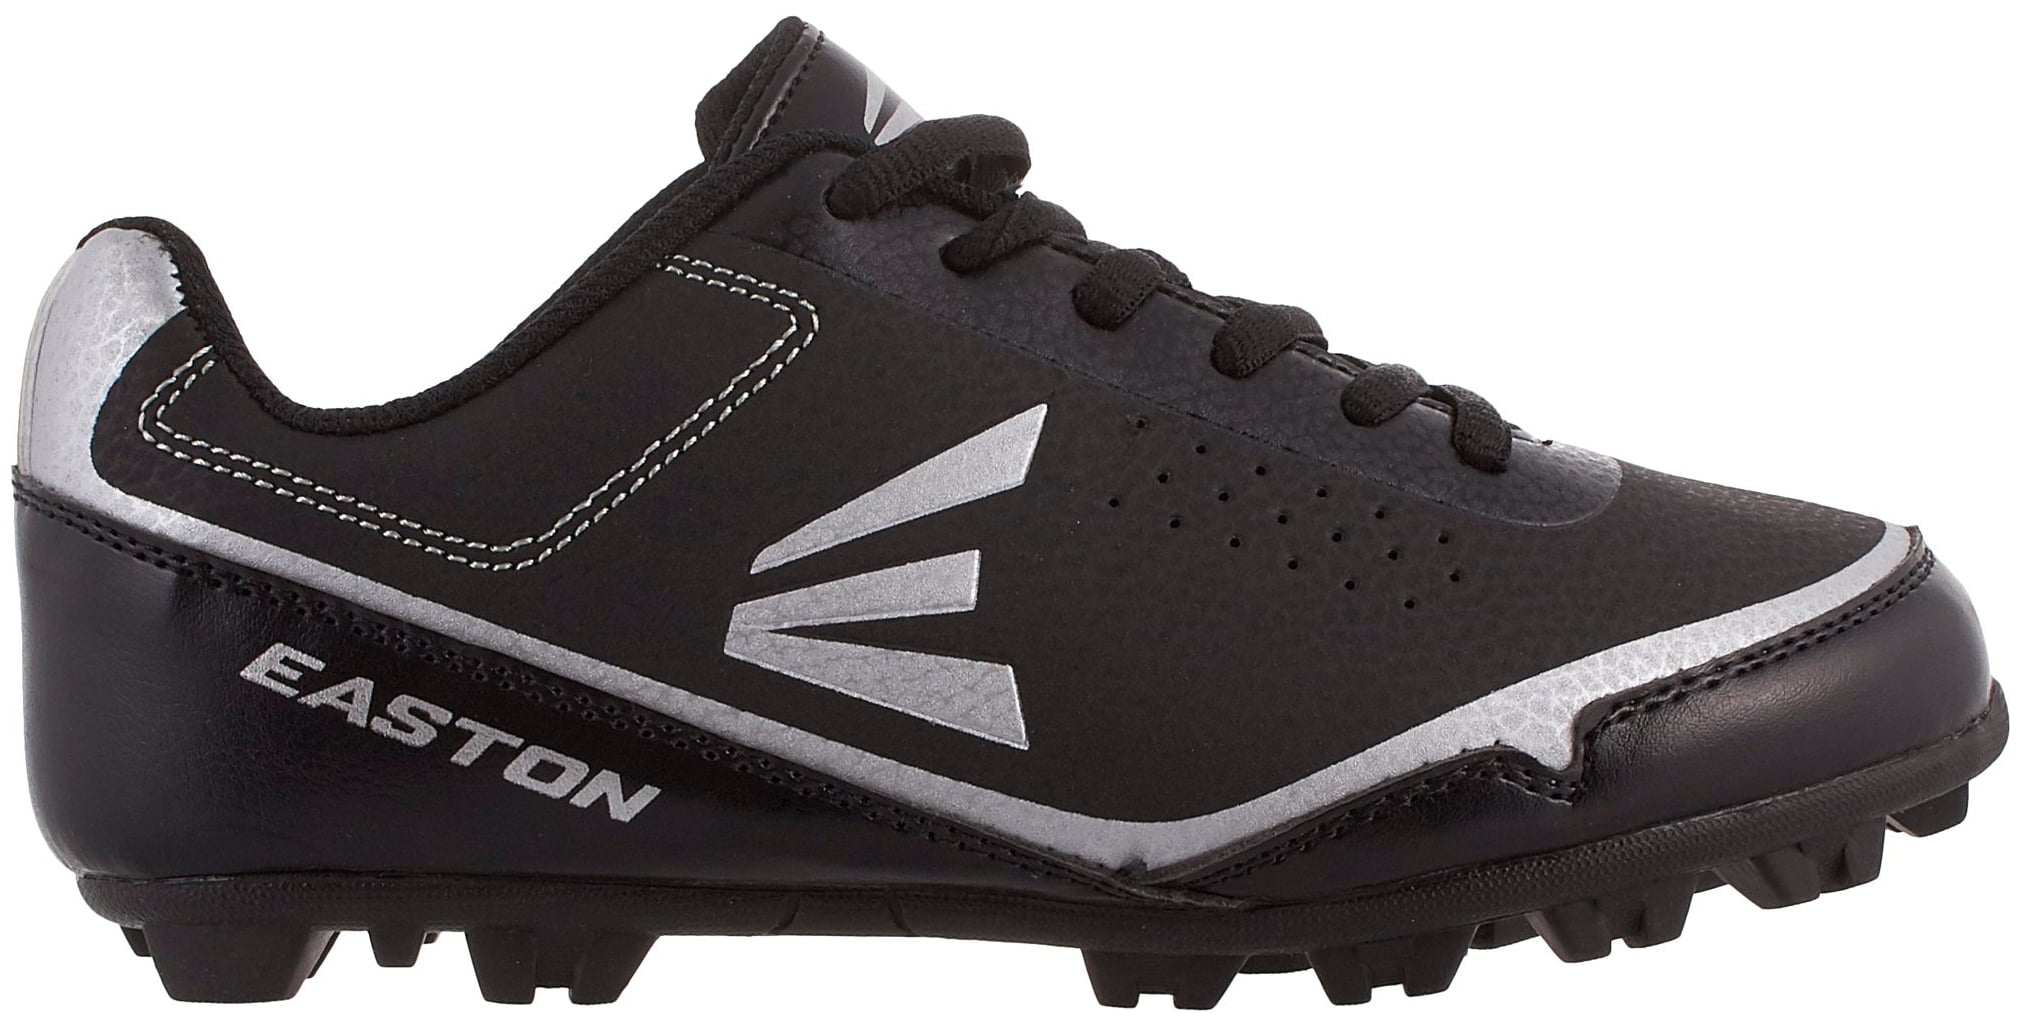 B24800 Details about   Boys Easton 10HG Speed Elite RM blk/silver Baseball Cleats 